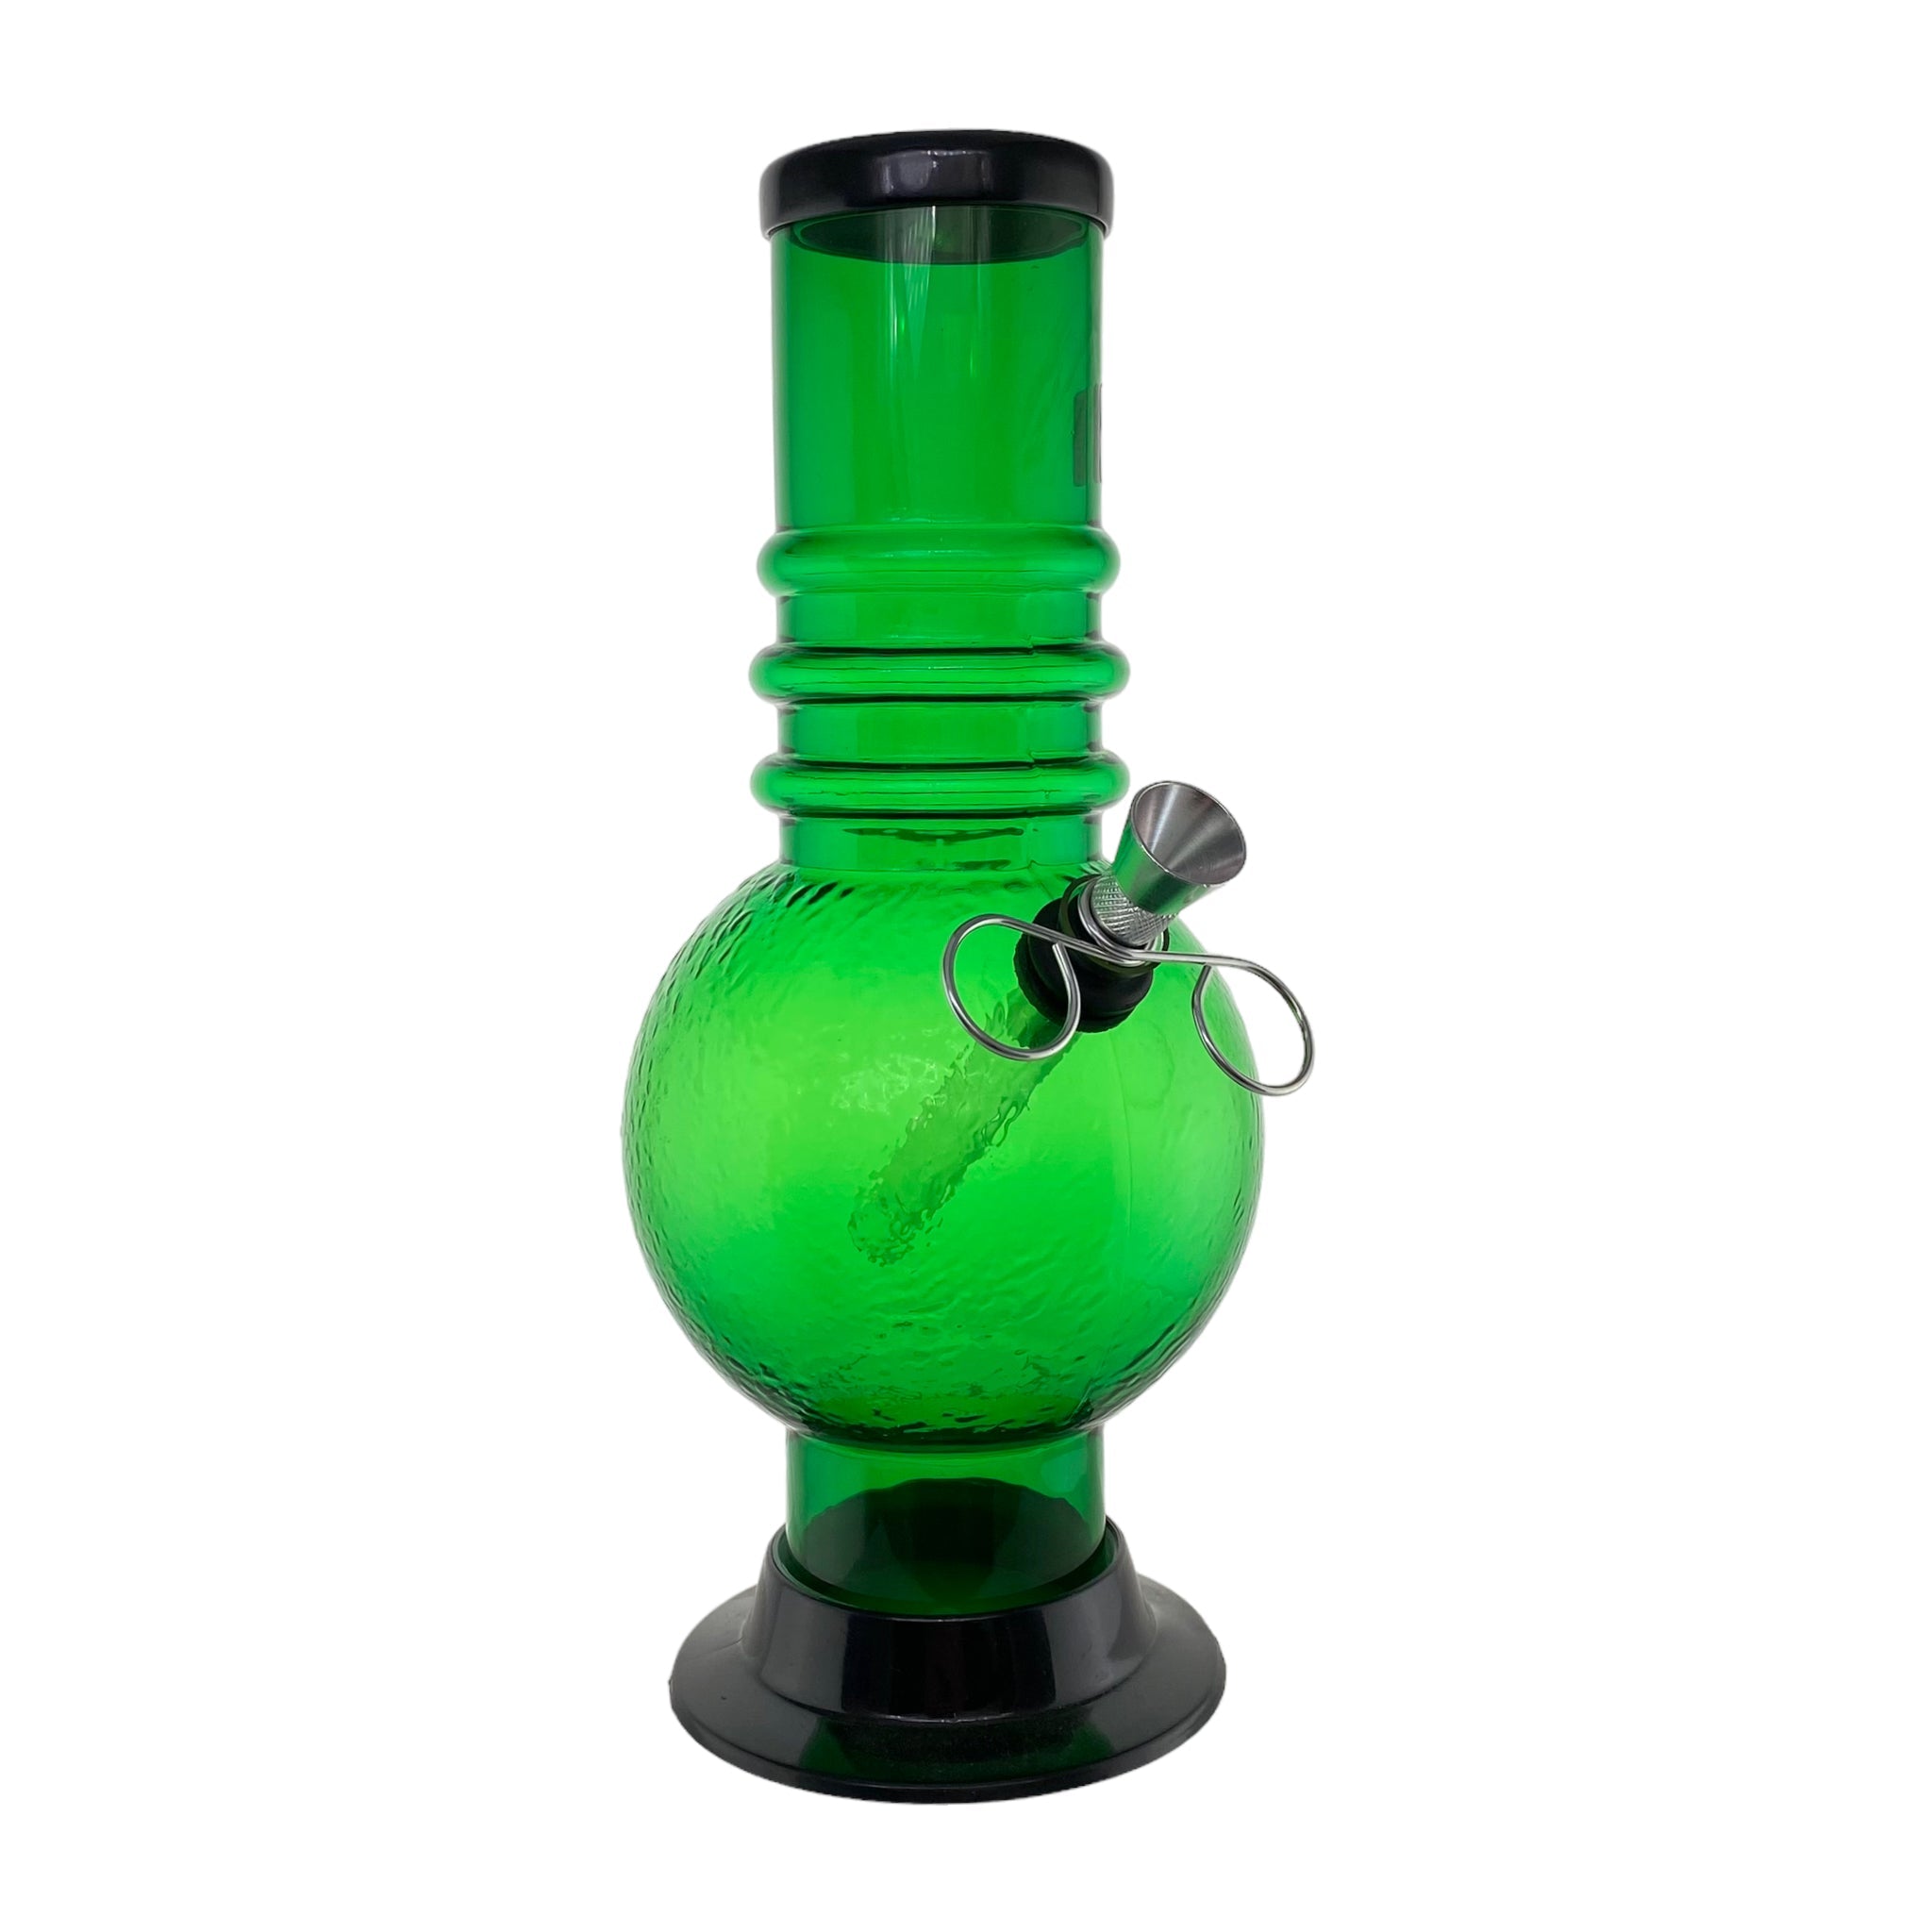 collection of Acrylic Bongs and pipes